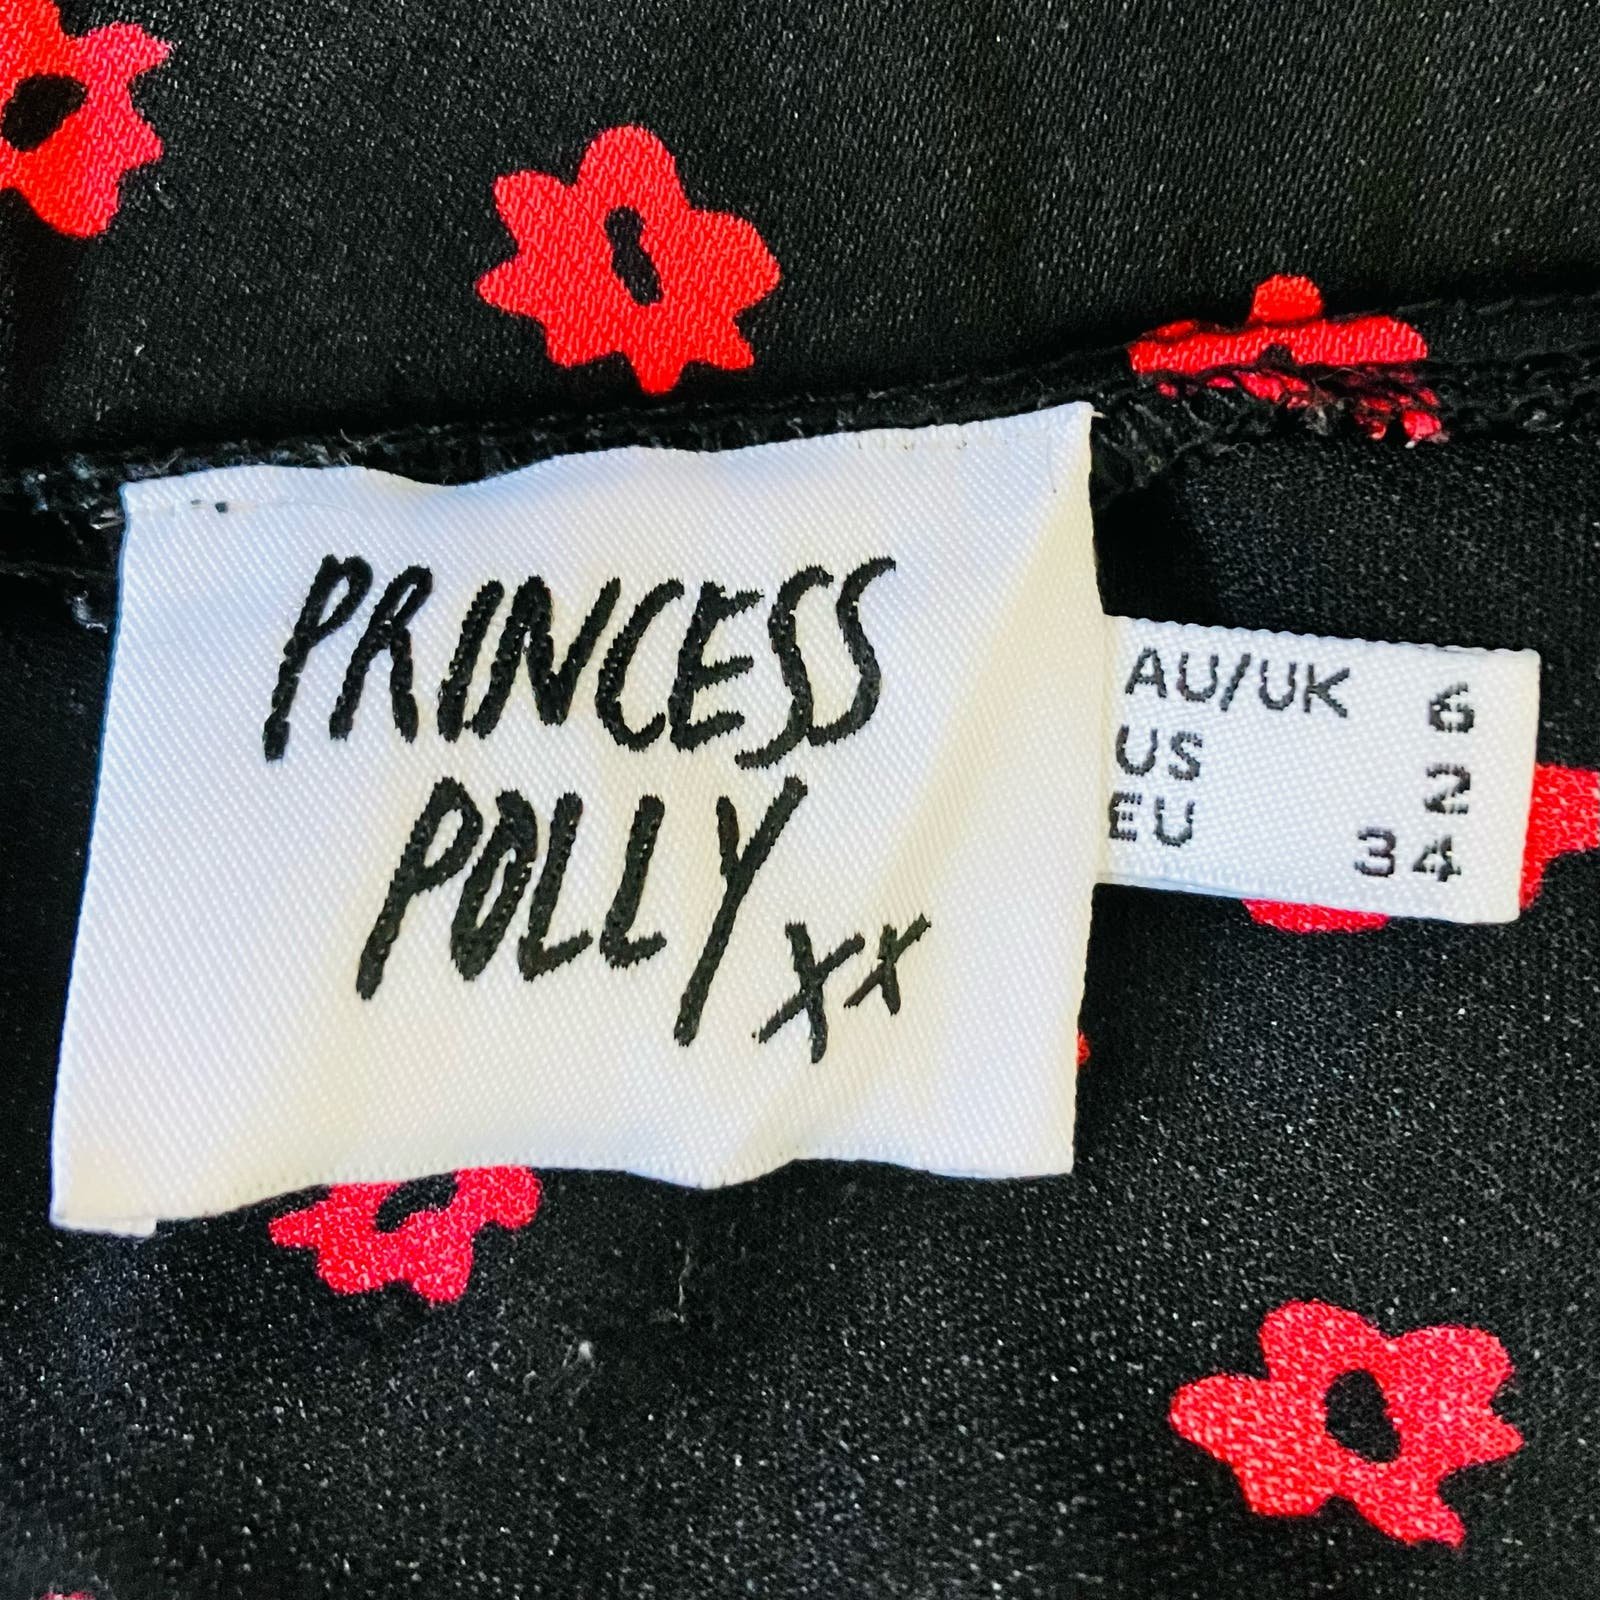 Classic Princess Polly Long Back Maxi Skirt Red Flowers Size 2 l1KflruUD Cheap